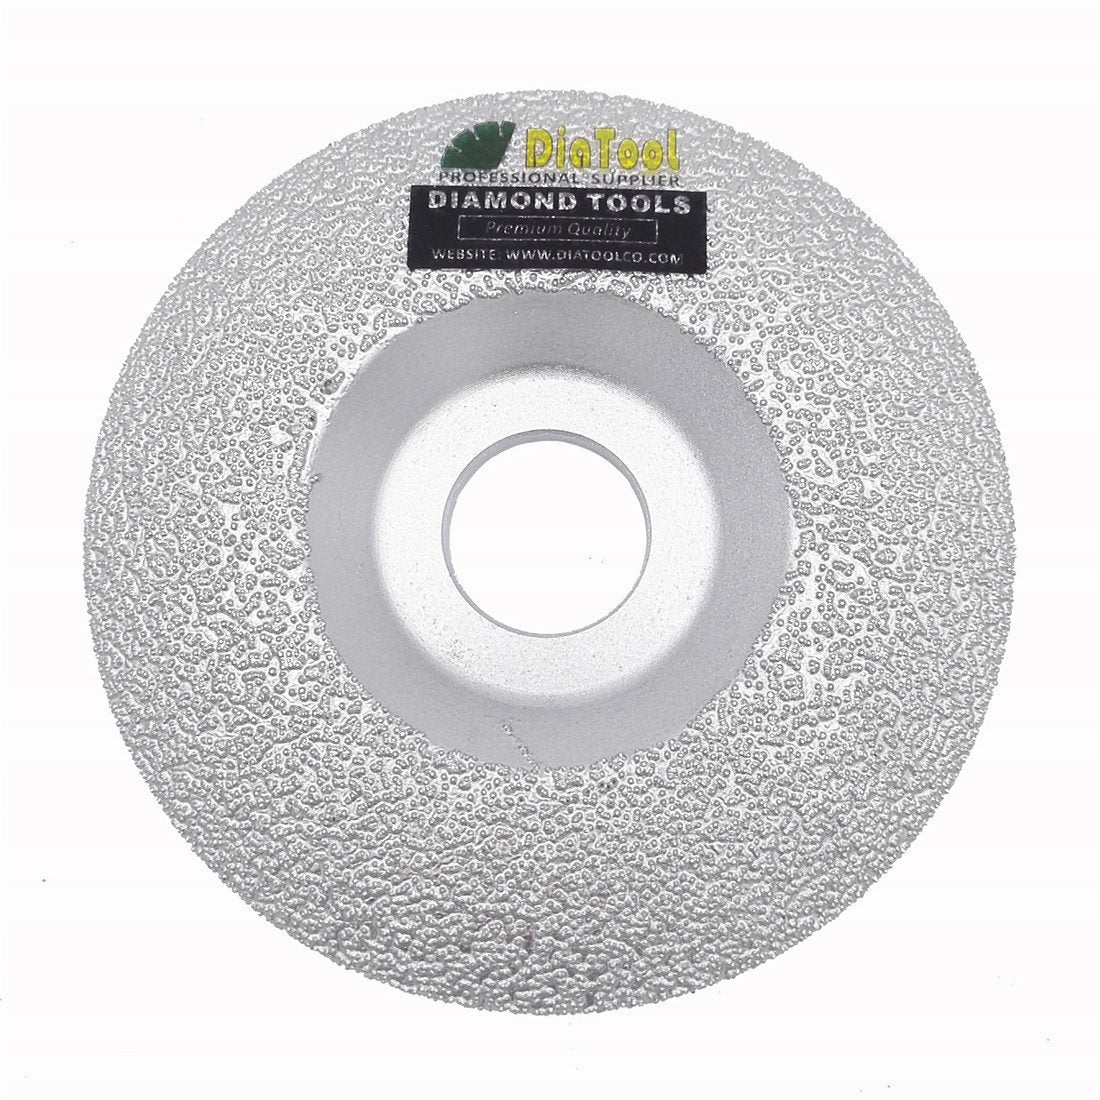 findmall  4 Inch Vacuum Brazed Diamond Grinding Disc Diamond Grinding Cup Wheel Fit for Granite Marble Iron Steel Masonry Convex Vacuum Brazed Grinding Disc Fits 7/8 Inch Arbor FINDMALLPARTS